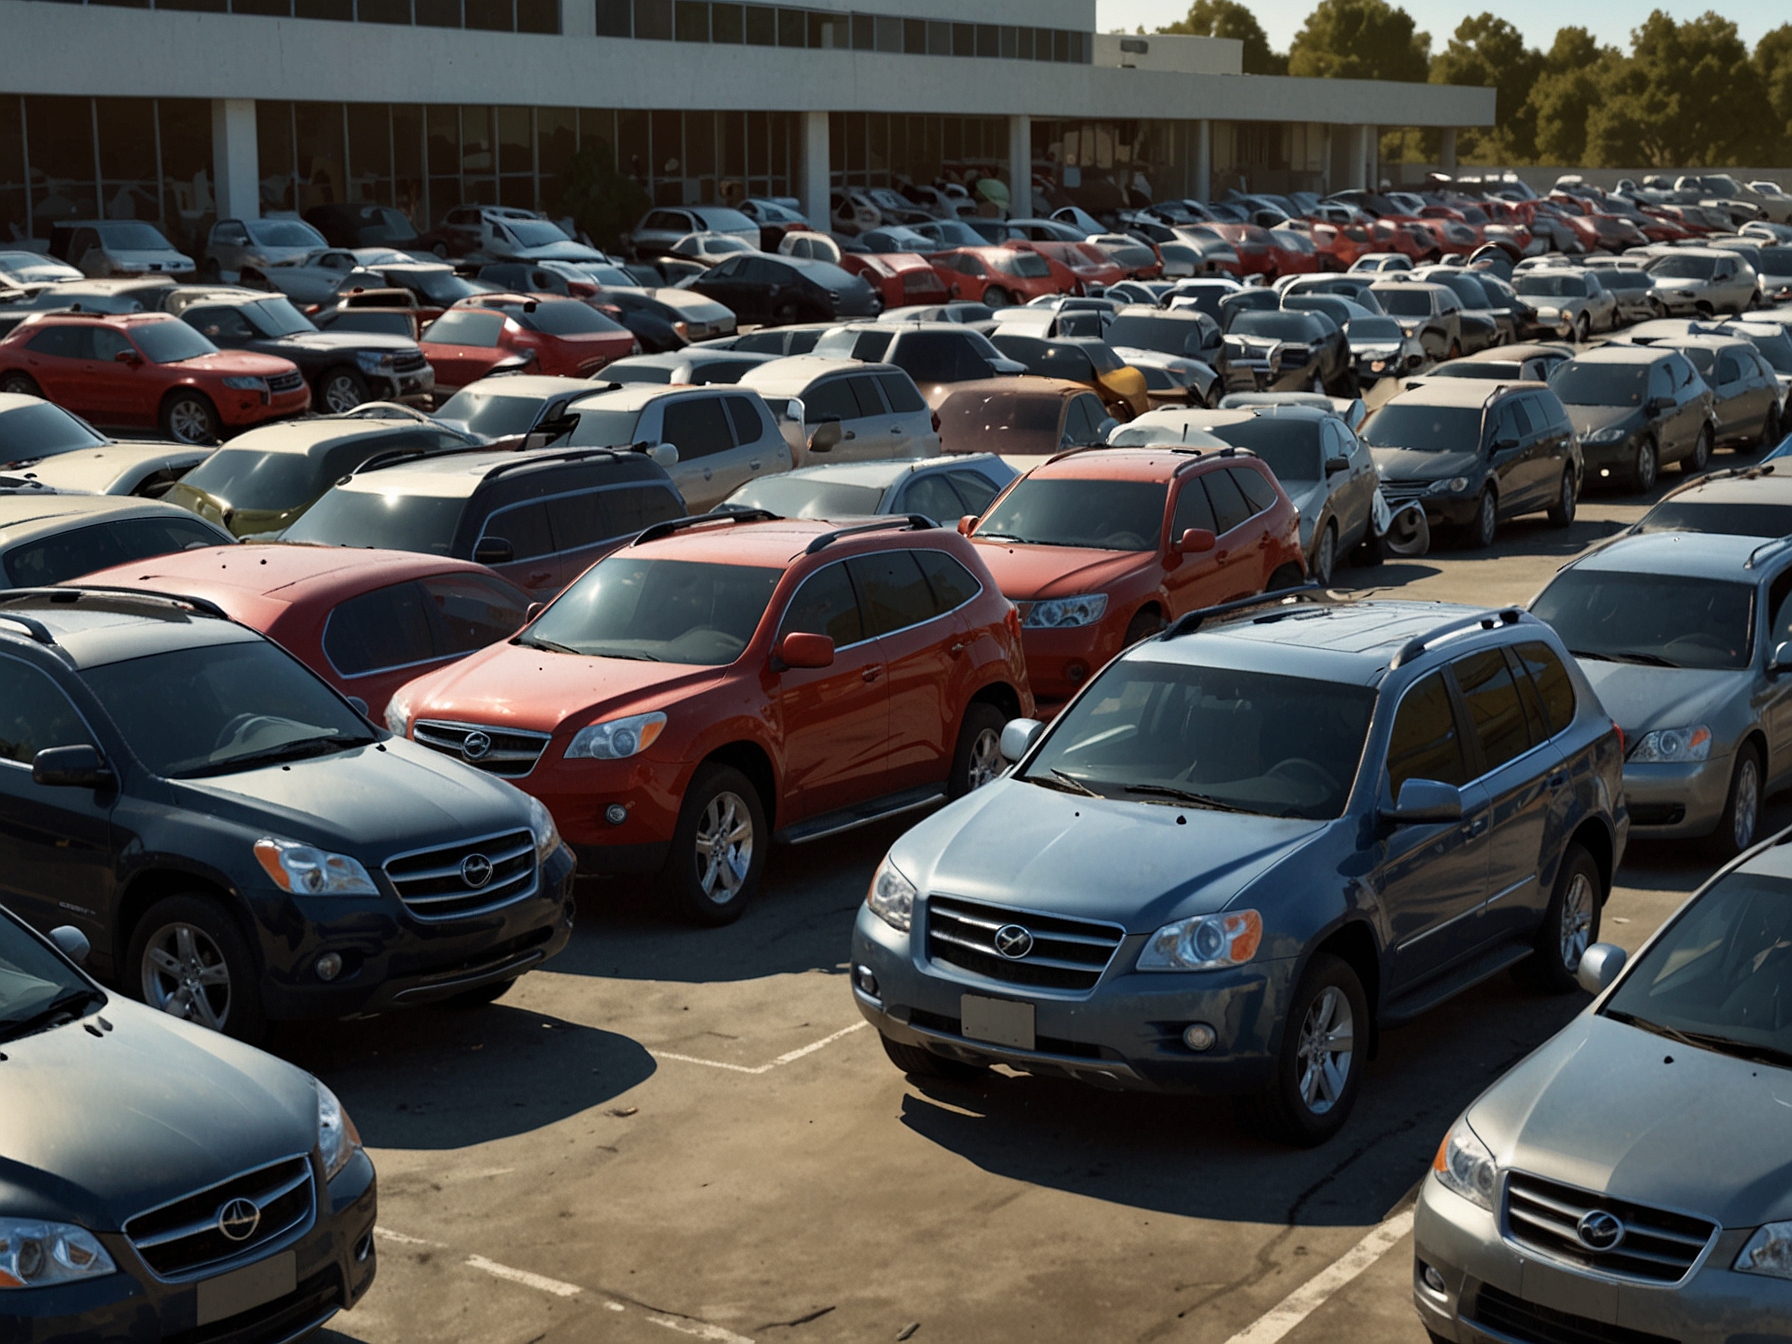 A used car lot with various SUVs, including some of the models that experts suggest avoiding due to high depreciation and reliability issues.